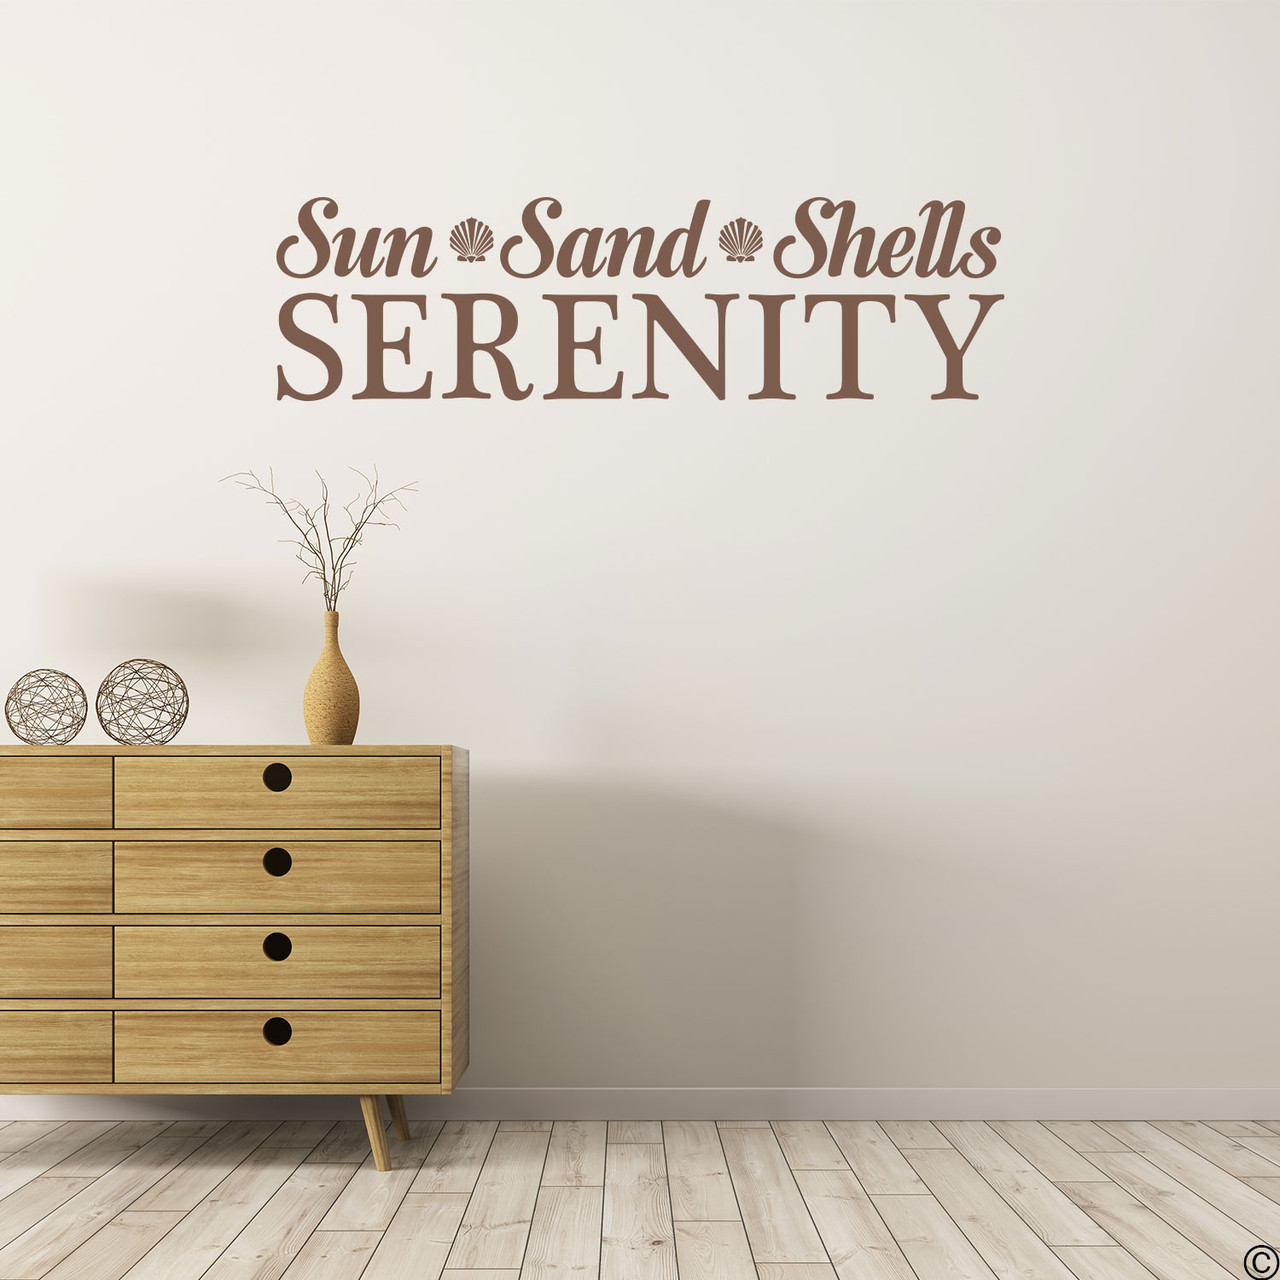 Seashell wall decal quote of, "Sun, Sand, Shells, and Serenity." Shown here in limited edition espresso vinyl color.